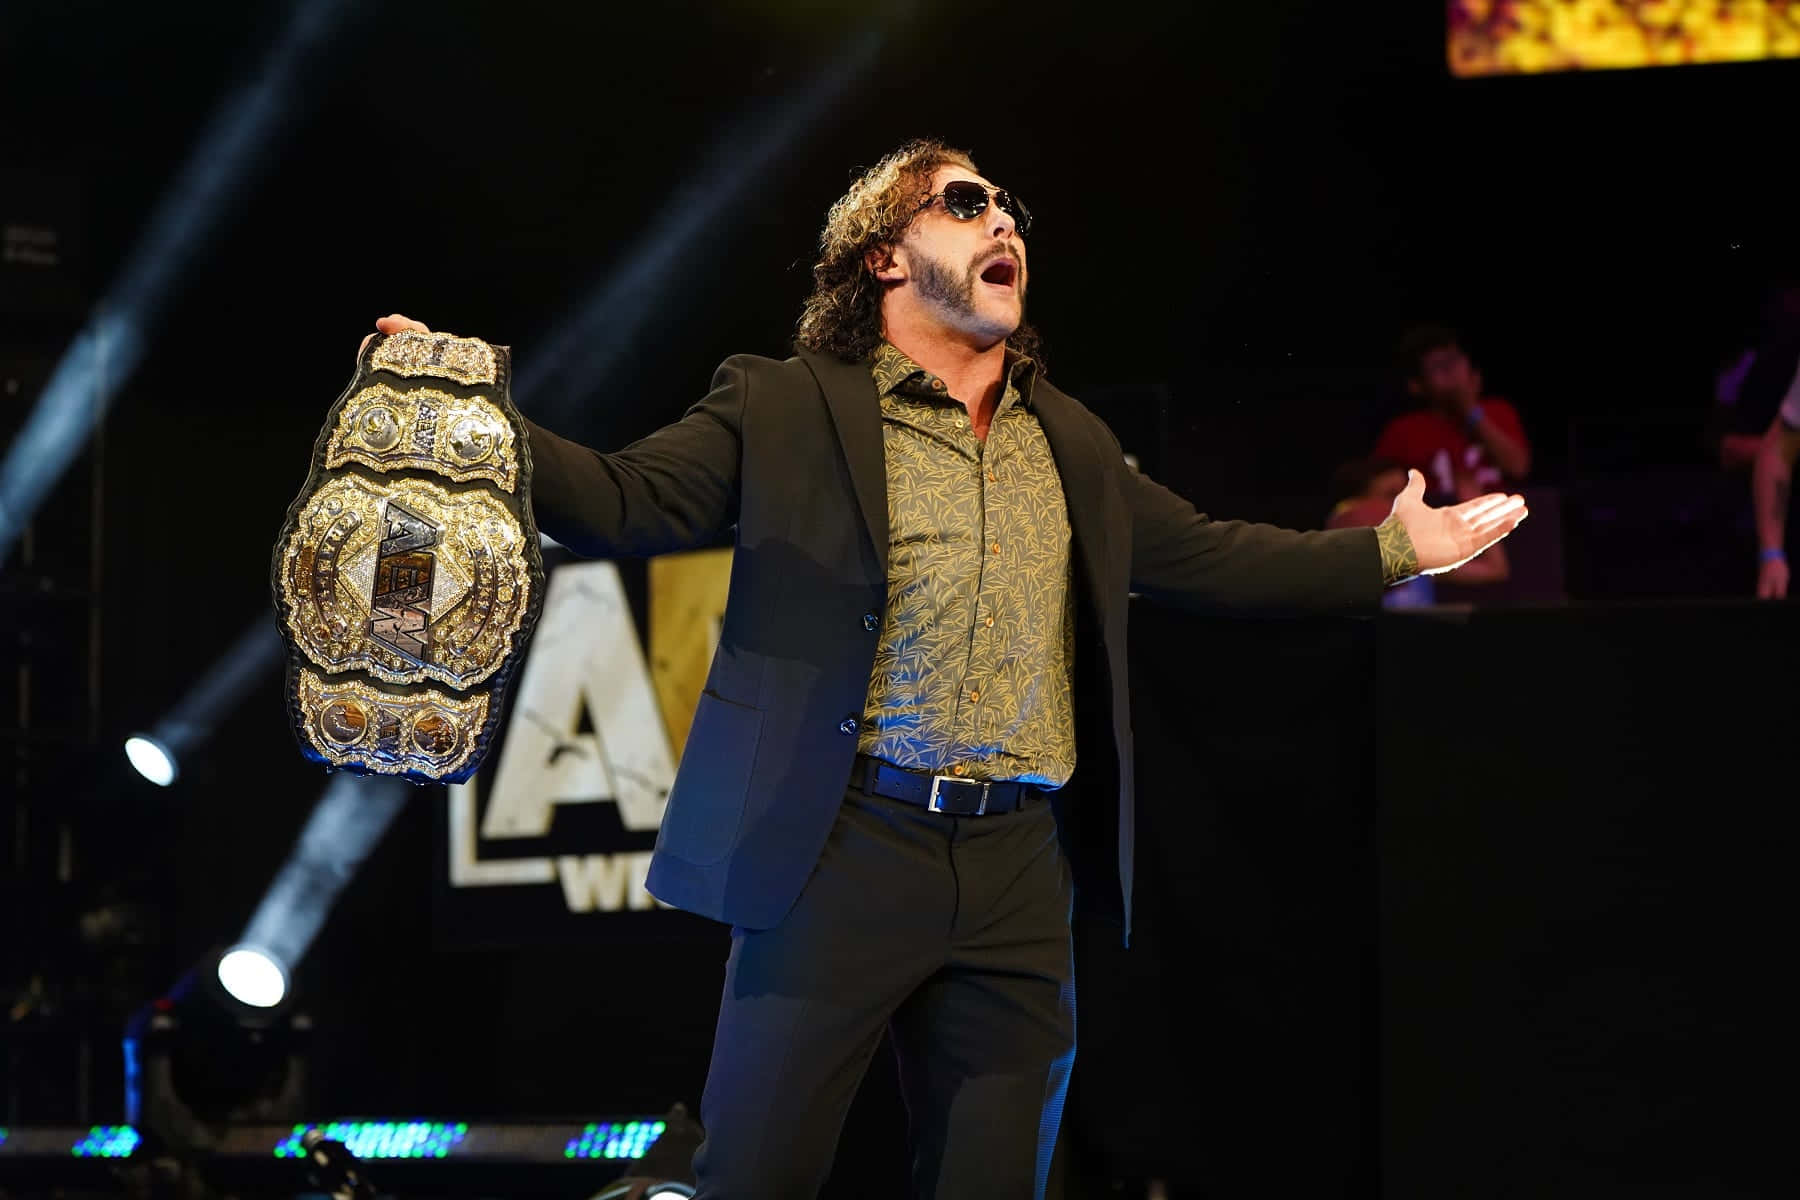 Kenny Omega Making A Grand Entrance During Aew Dynamite Event. Wallpaper